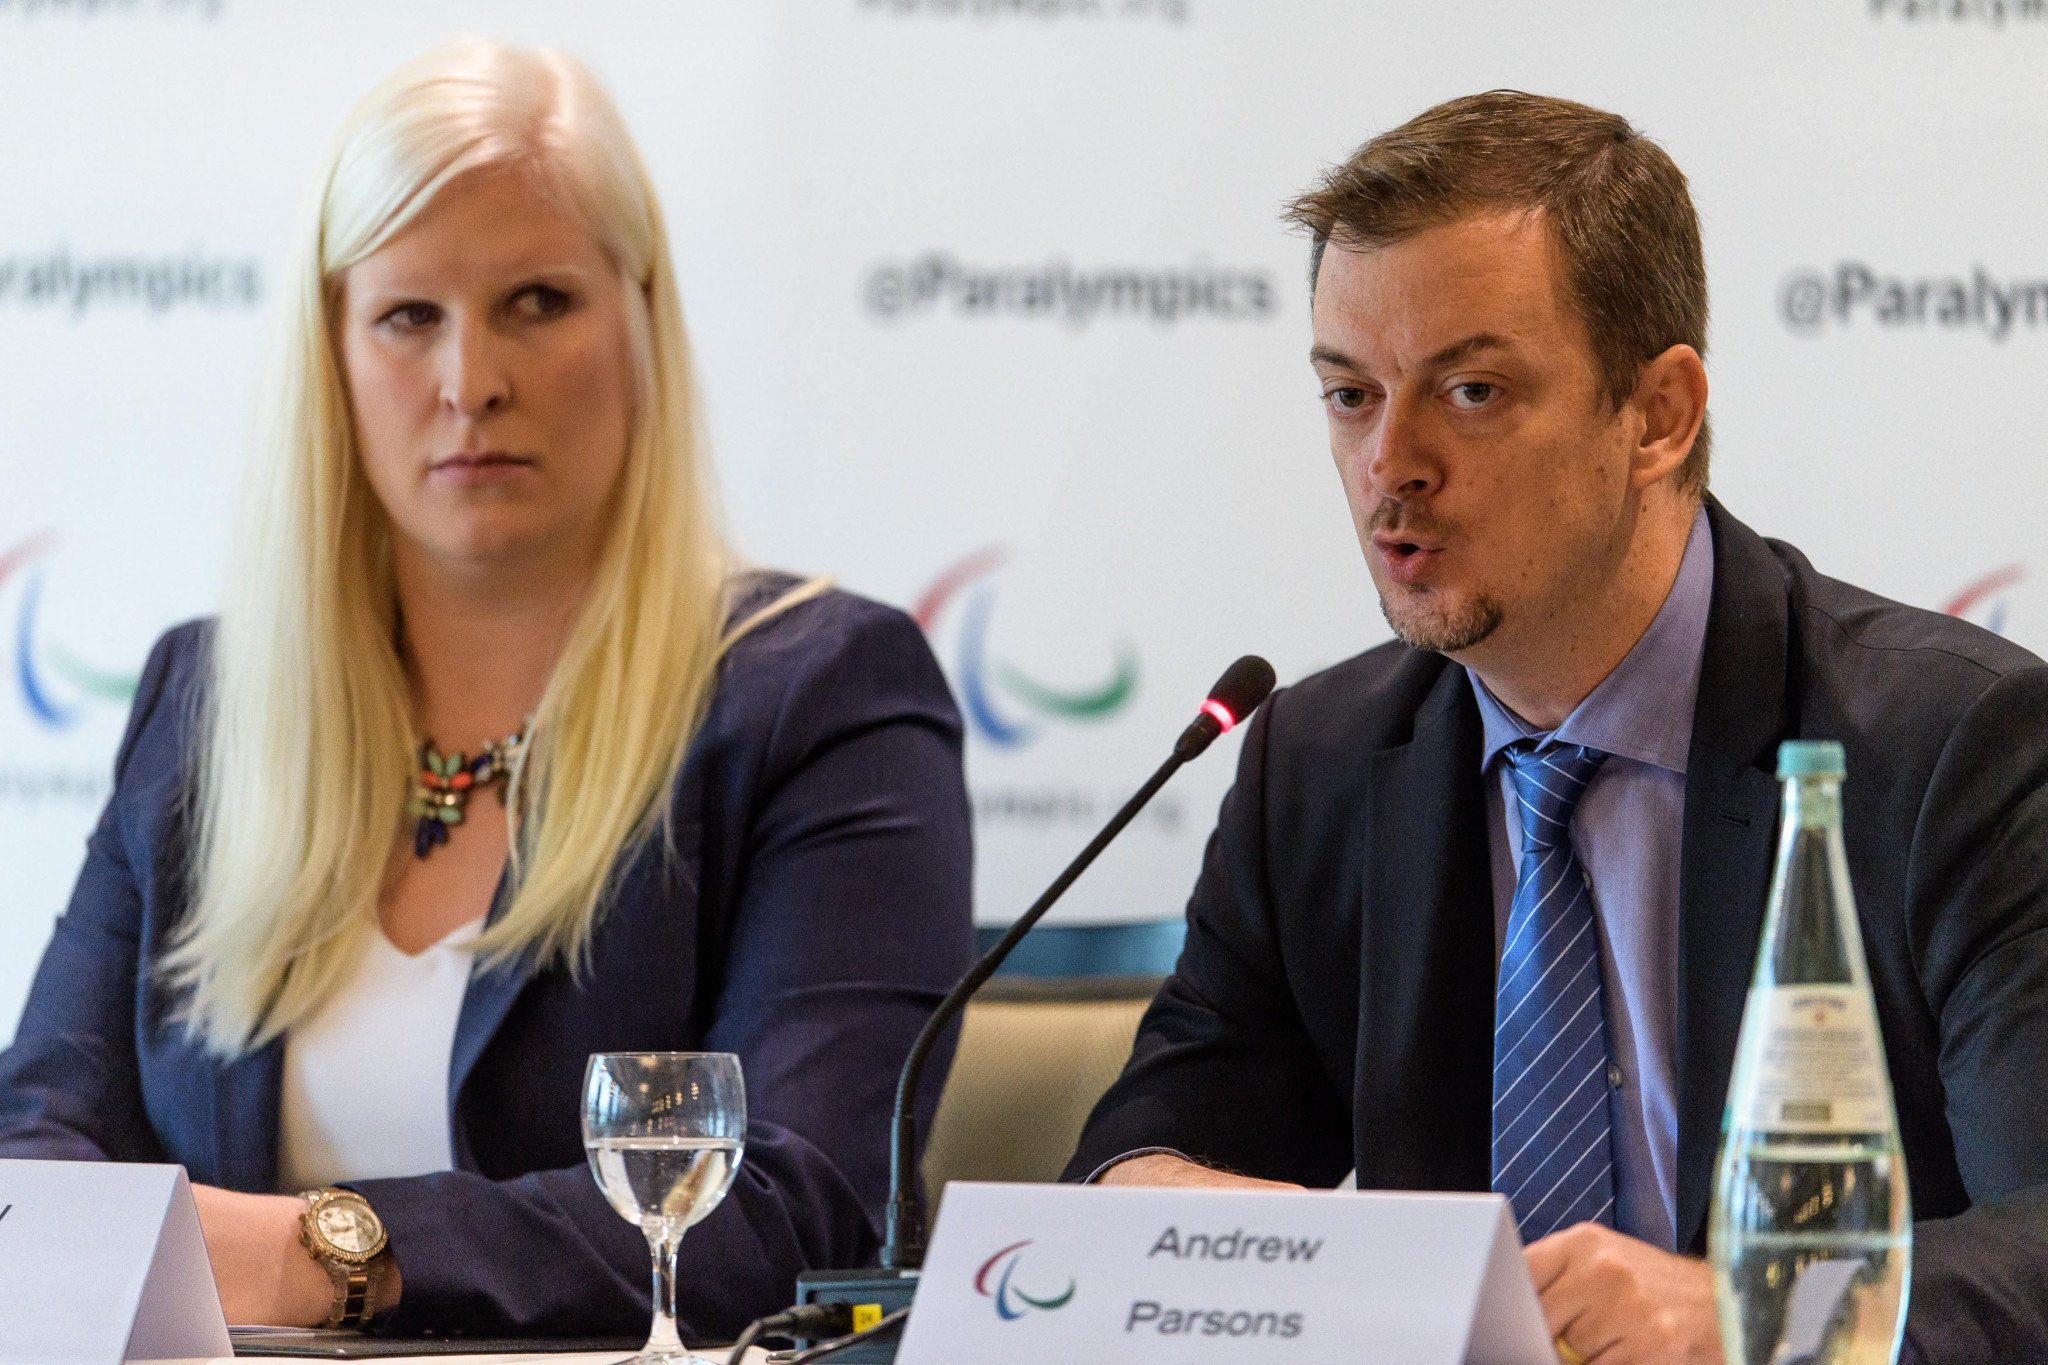 IPC President Andrew Parsons has claimed they are confident every NPA athlete is clean ©Getty Images